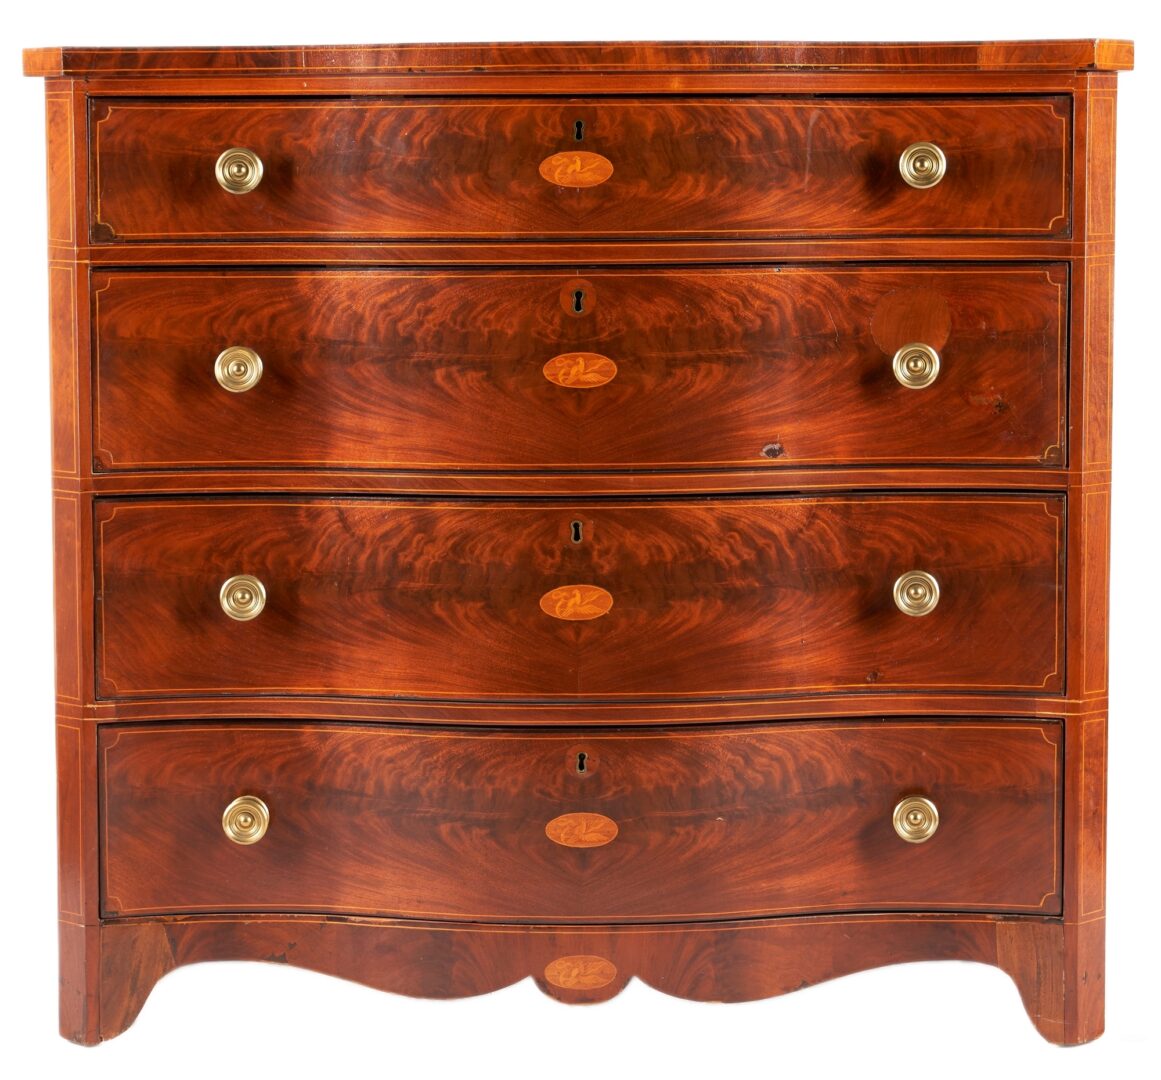 Lot 227: Federal Eagle Inlaid Serpentine Chest of Drawers